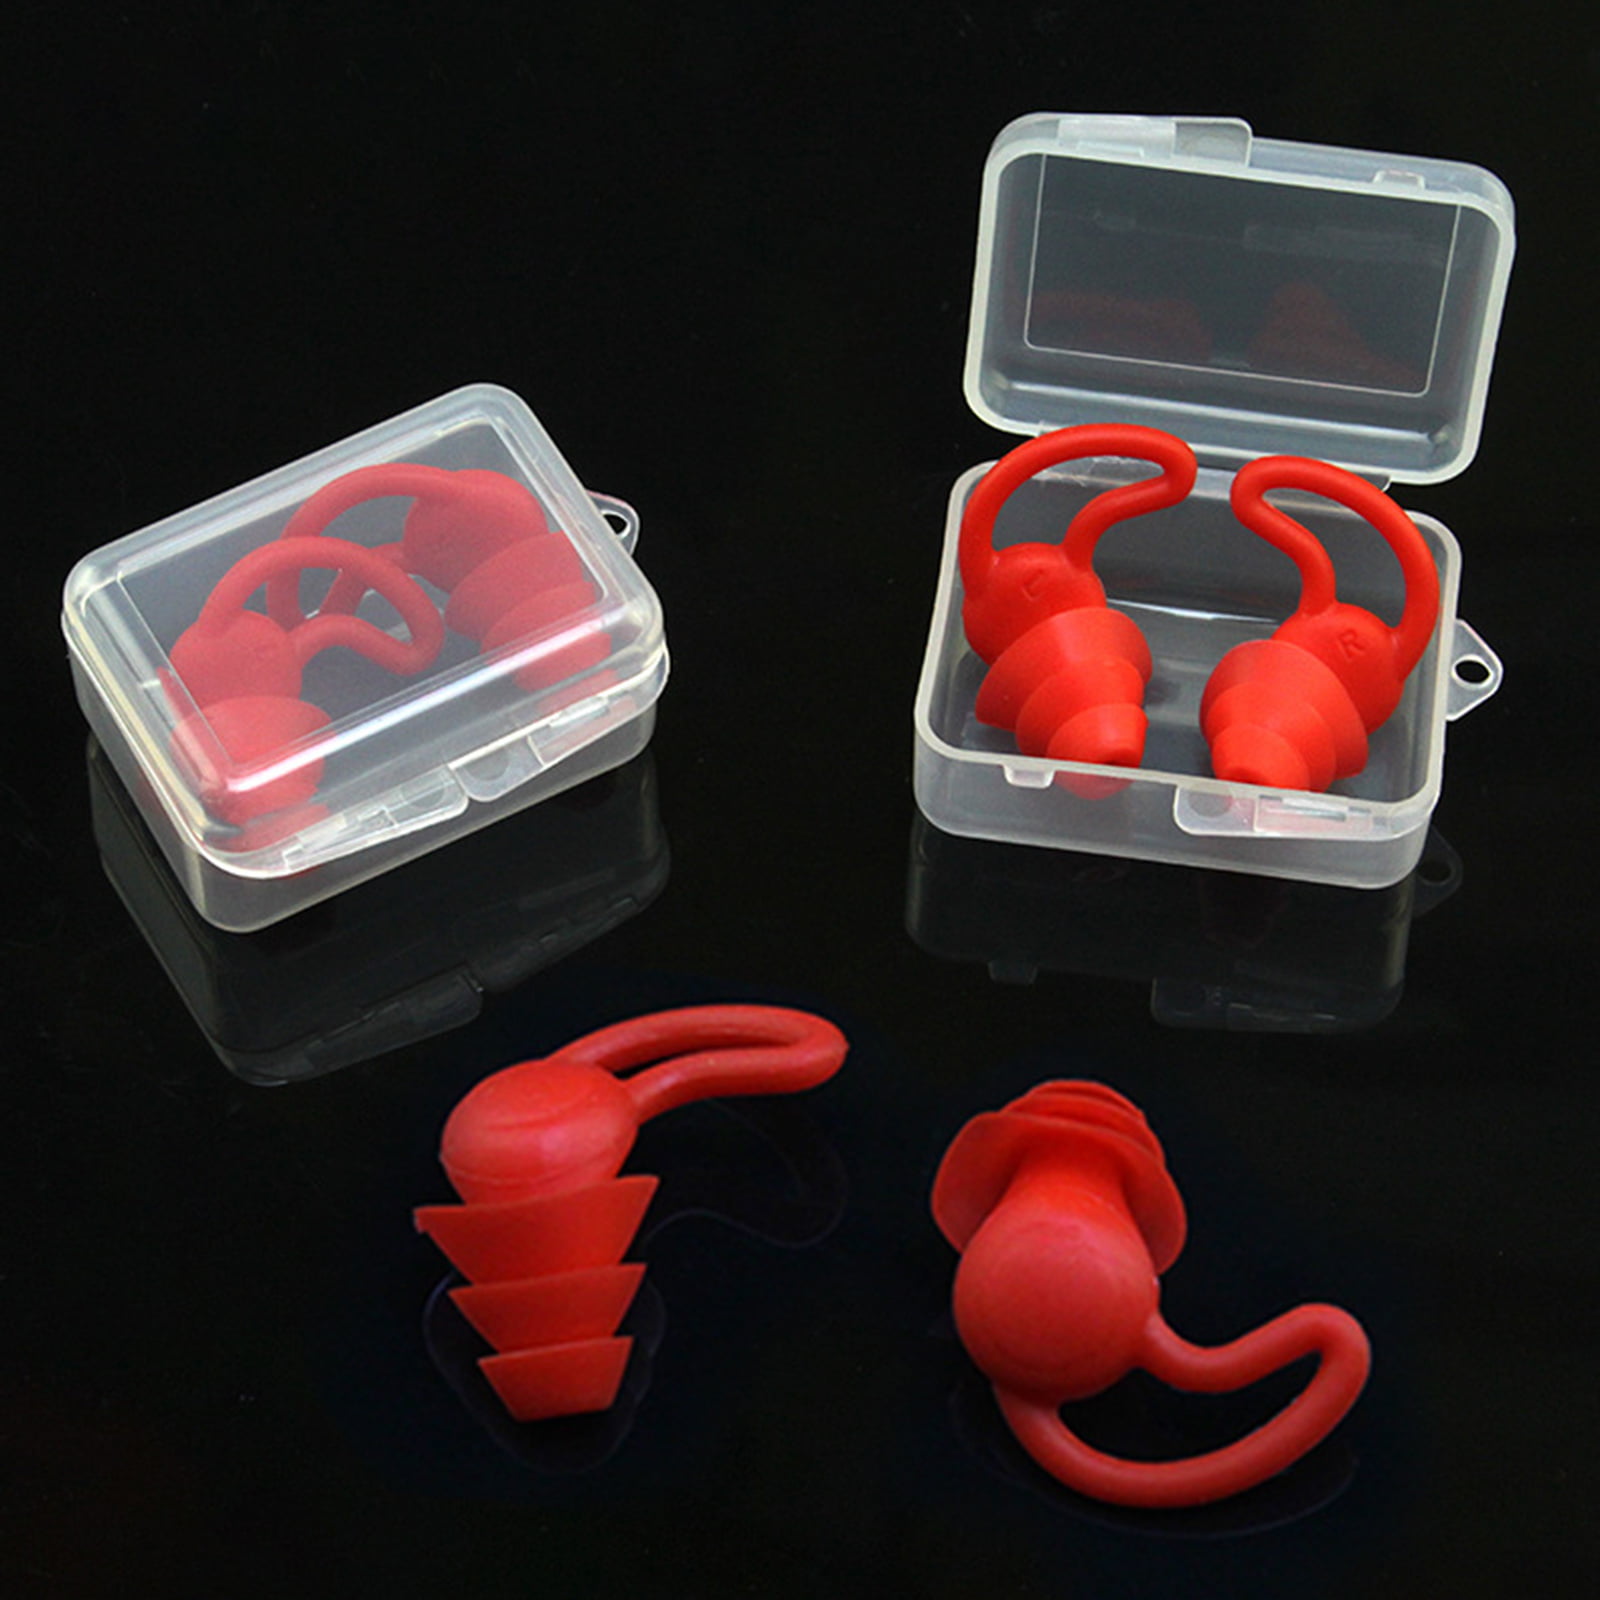 6/12 Pairs Reusable Silicone Ear Plugs for Swimming Sleeping Anti Snore w Cases 